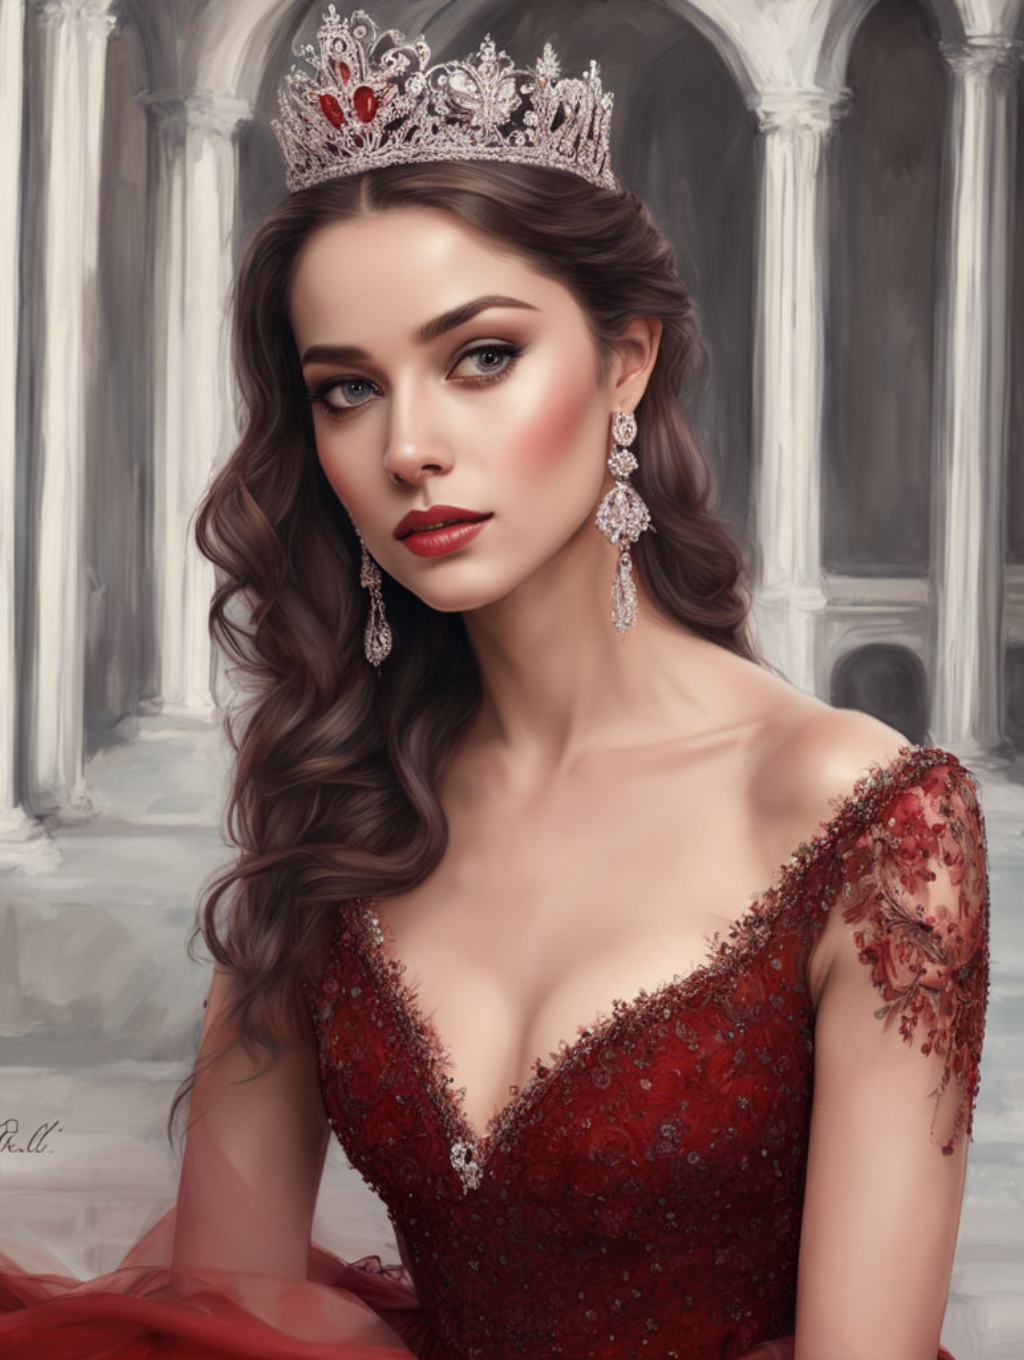 Glamorous Occasions: Profile Pictures & Art Portraits-Theme:3